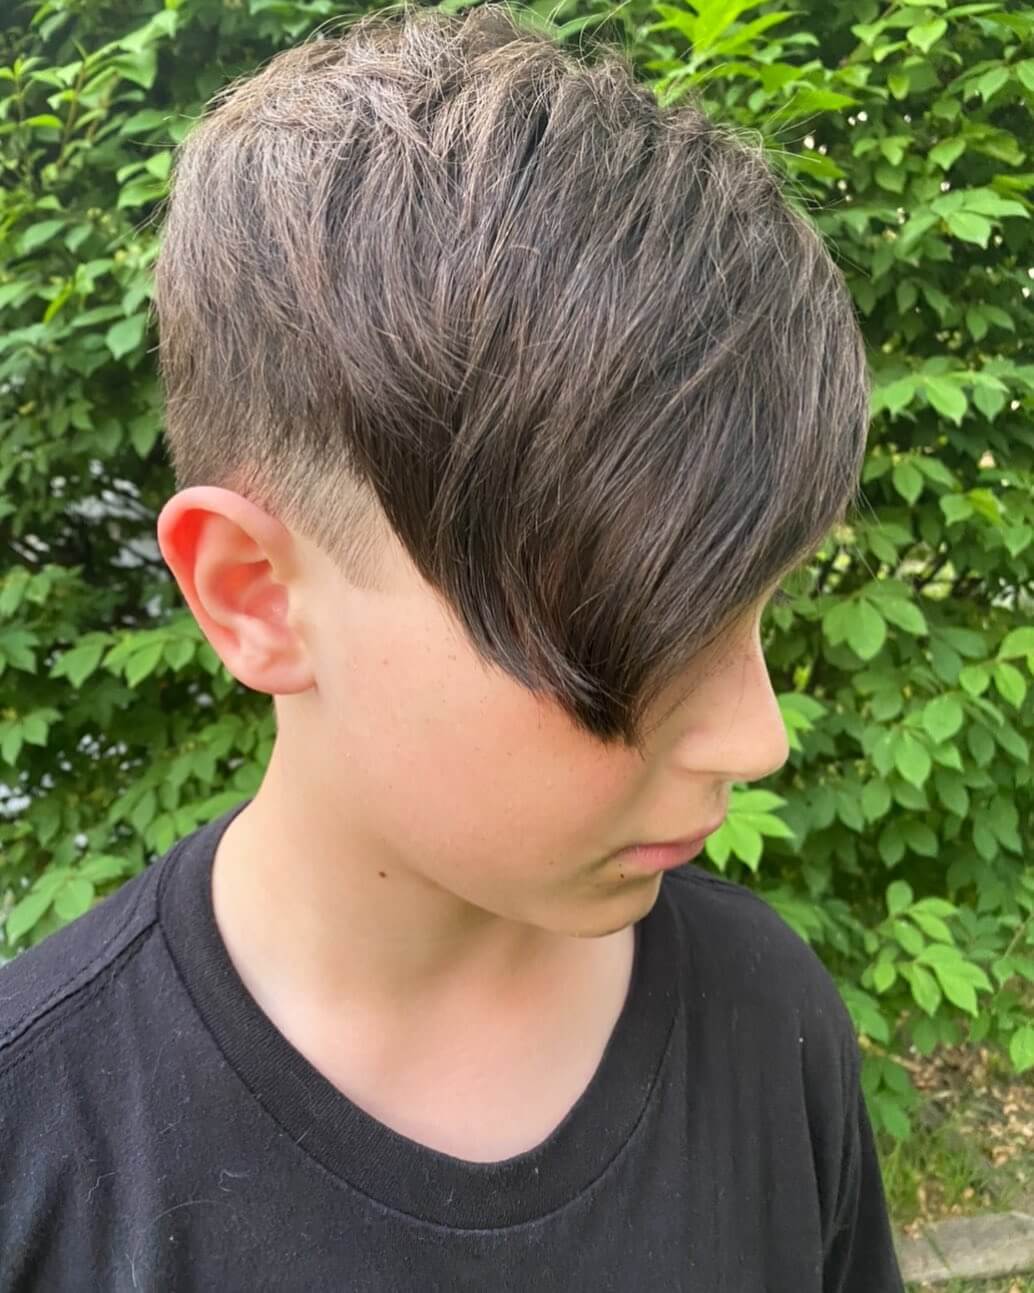 Skater Haircuts For Boys In 2023 Styles You Would Love To Have While Ride